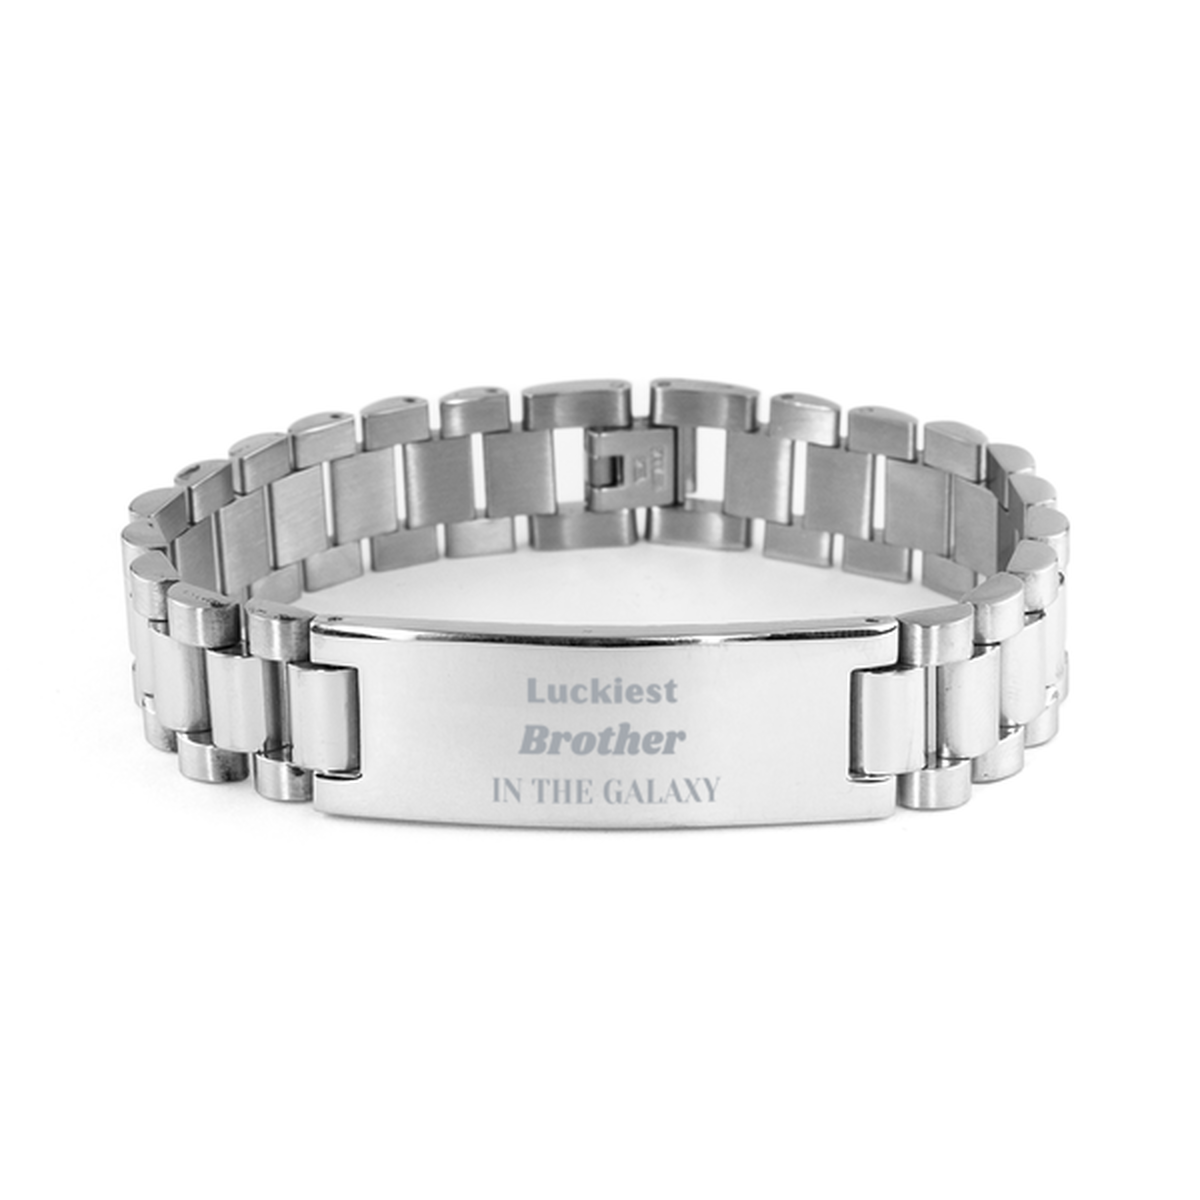 Luckiest Brother in the Galaxy, To My Brother Engraved Gifts, Christmas Brother Ladder Stainless Steel Bracelet Gifts, X-mas Birthday Unique Gifts For Brother Men Women